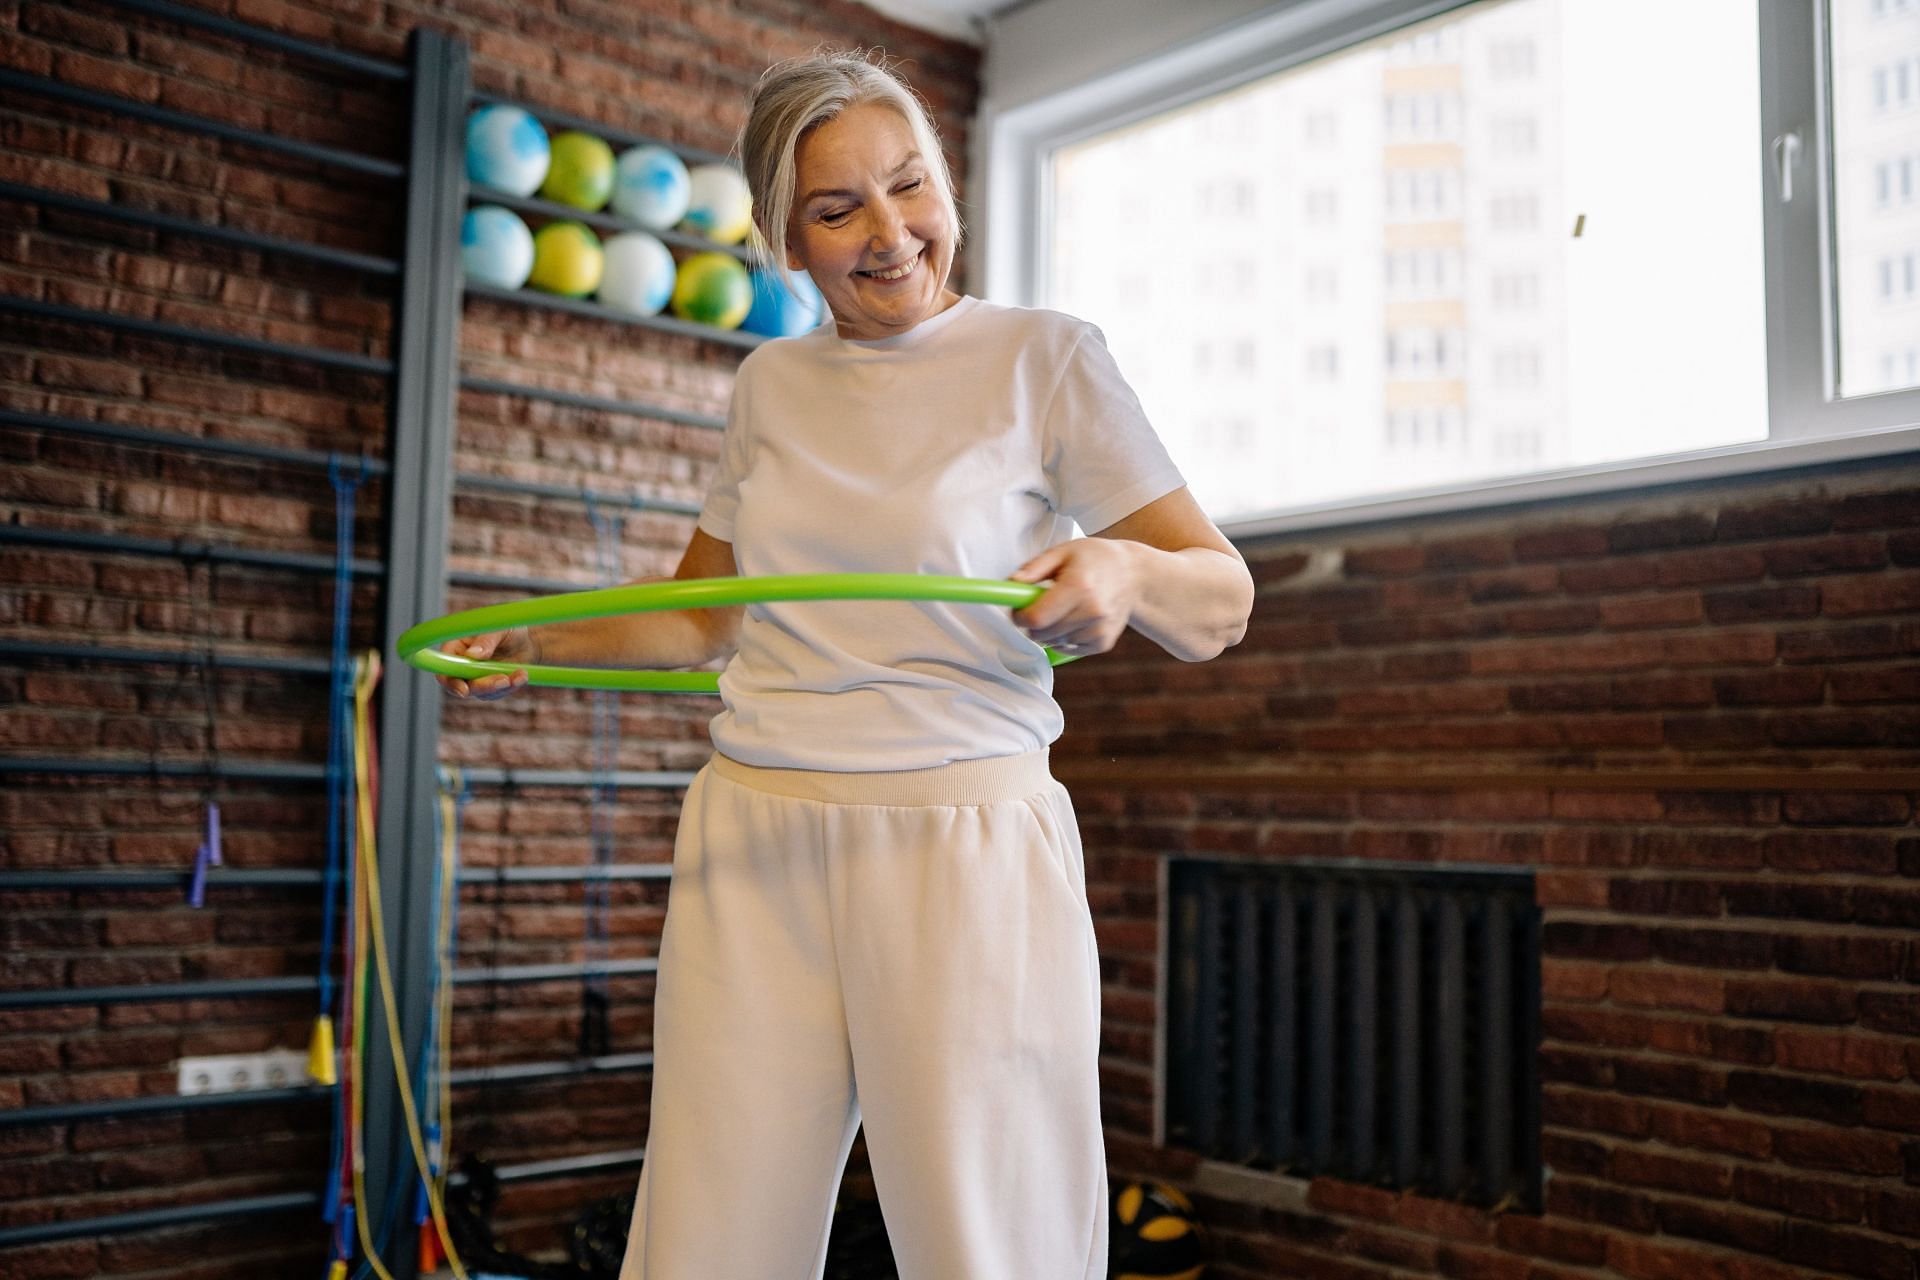 Everyone can perform hula hoop exercises, no matter your age, whether you&#039;re 6 or 60. (Image via Pexels/ Yan Krukau)